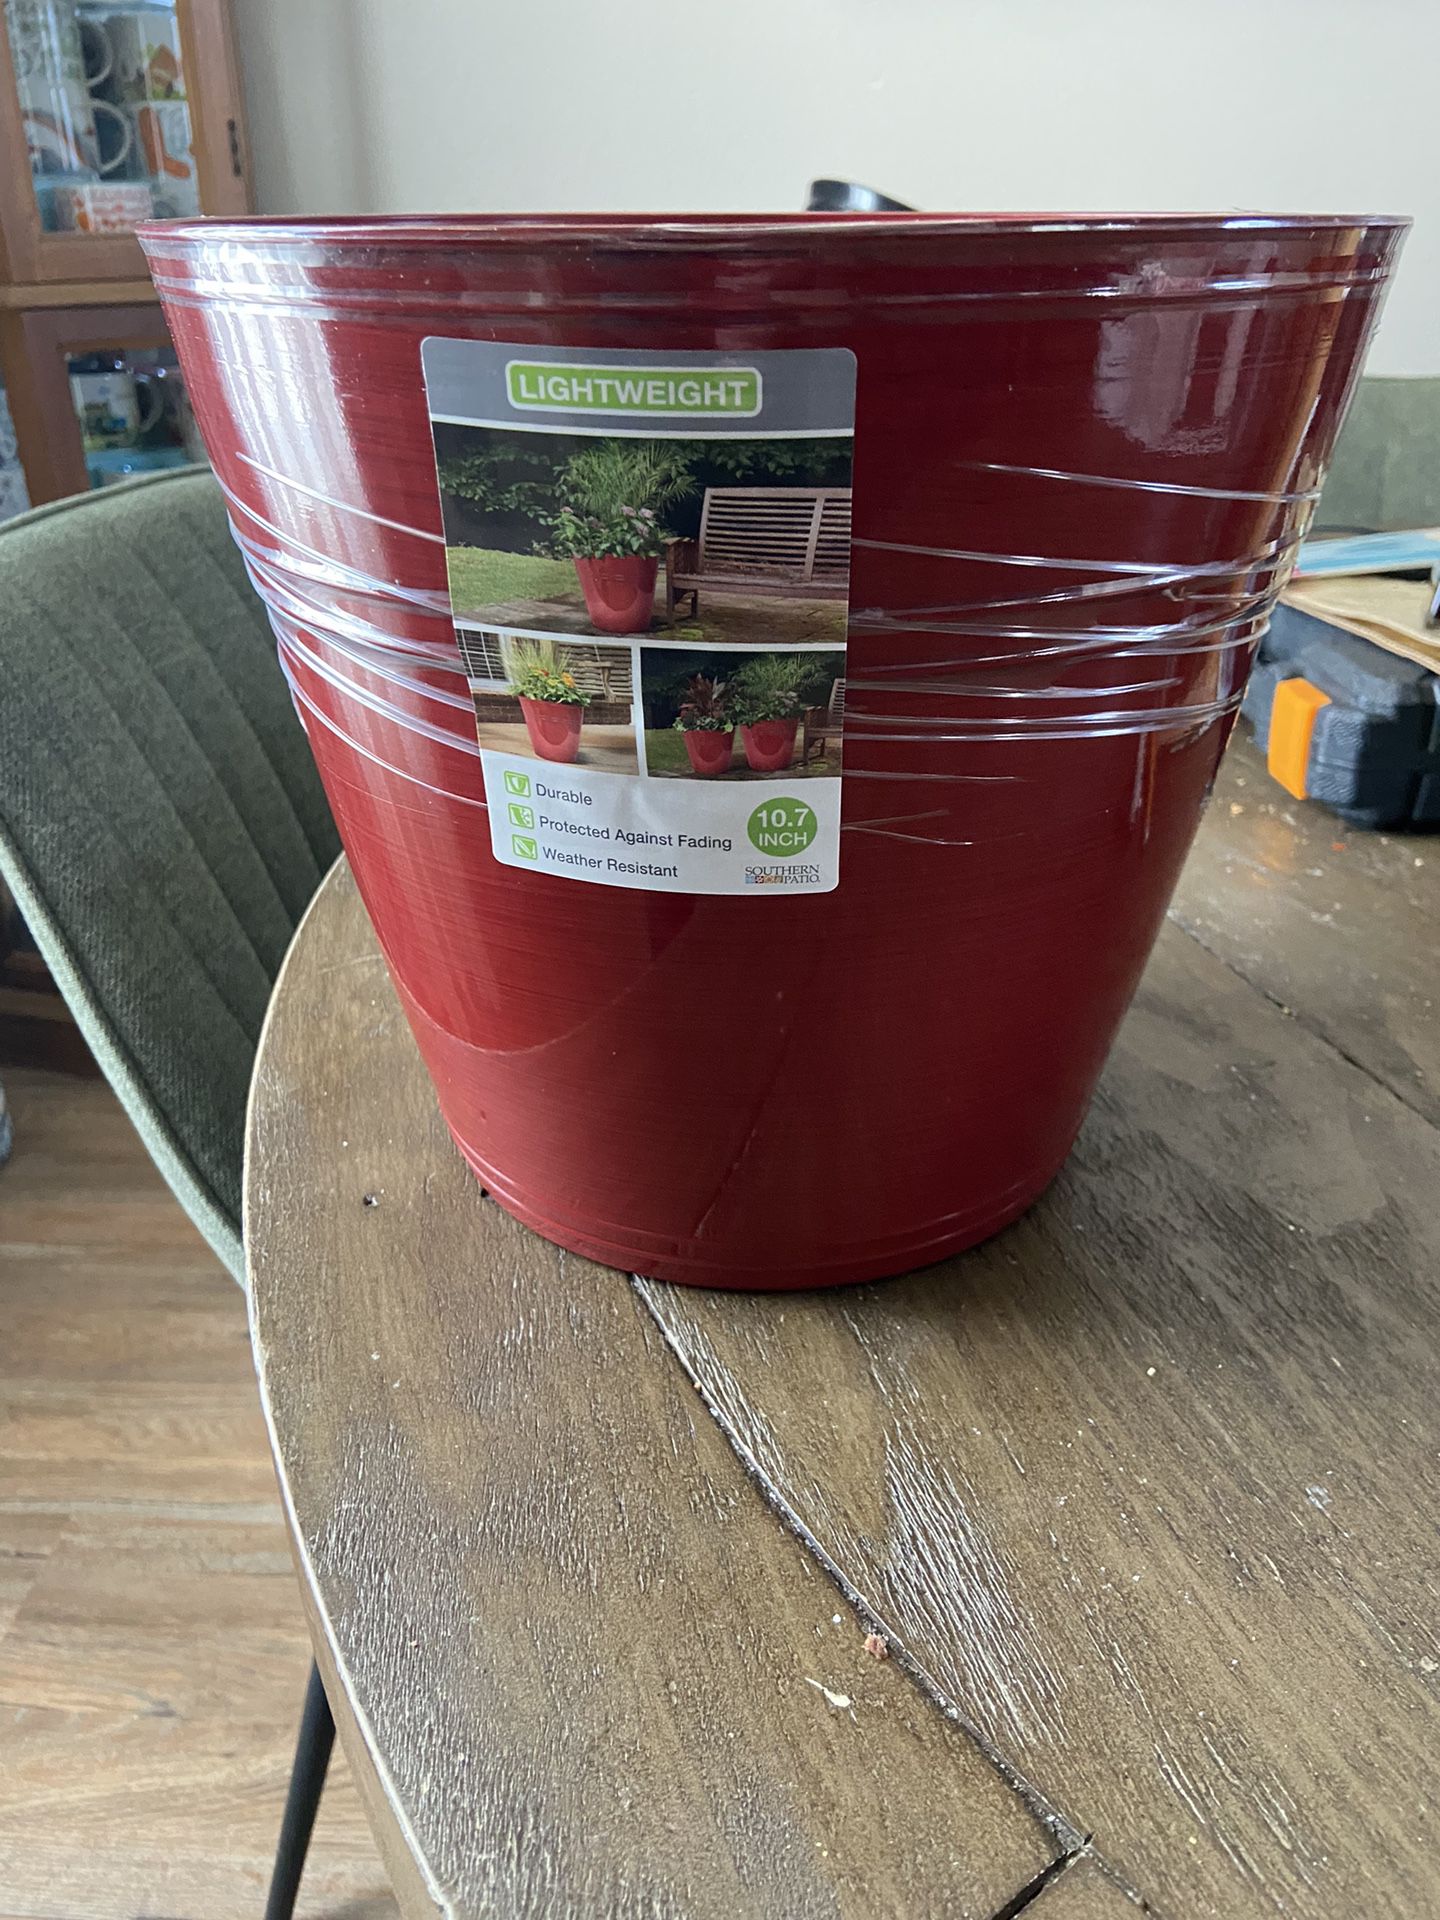 400 New planters / pots available at $3 each.